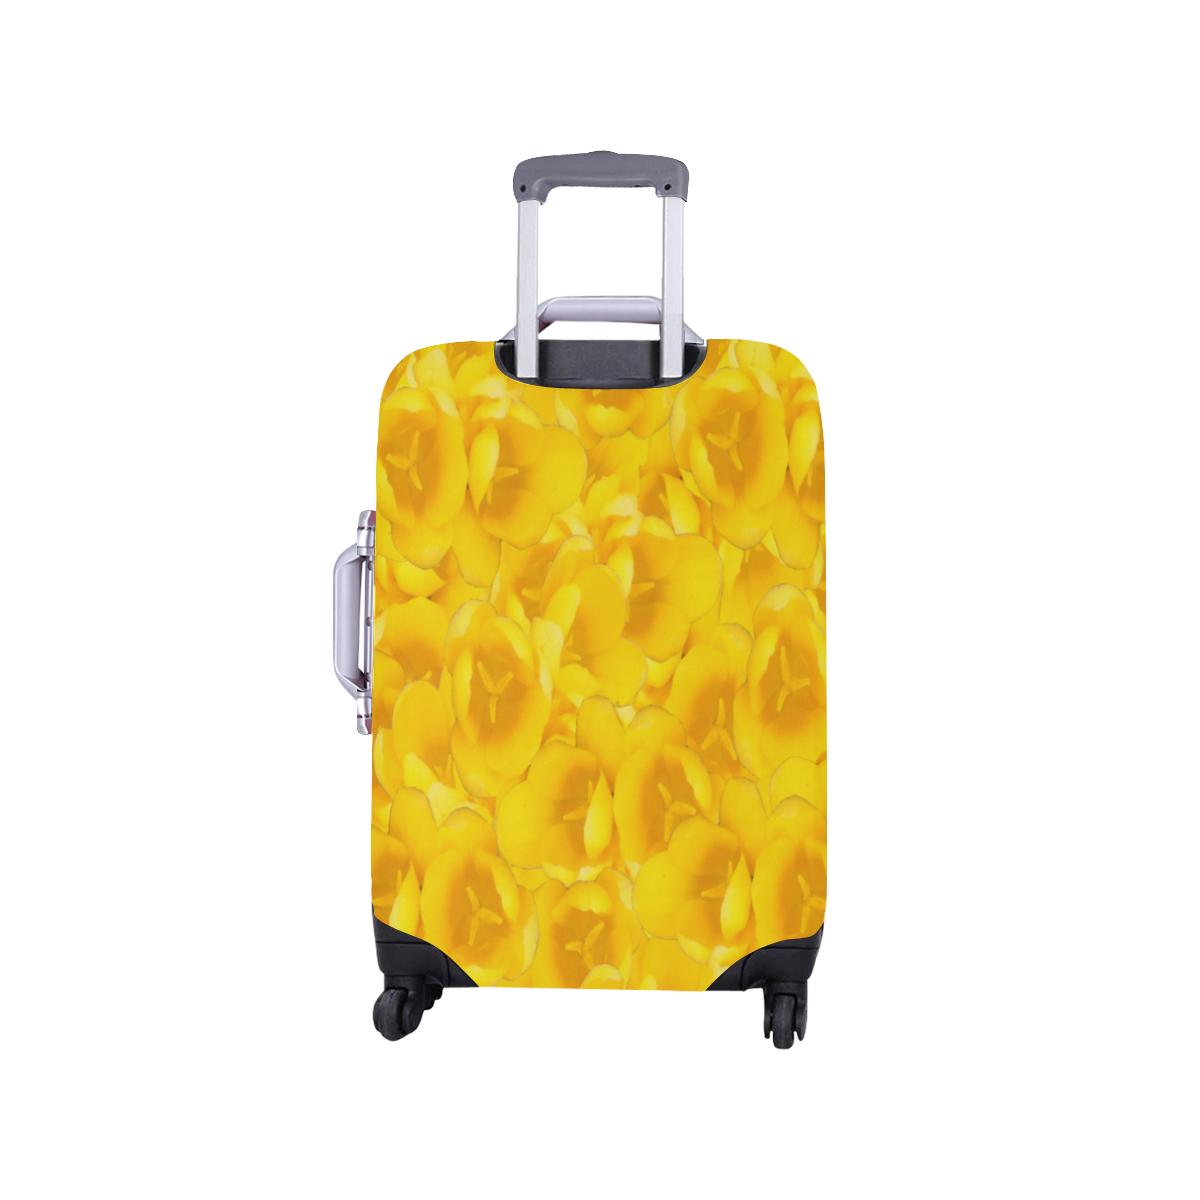 Tangerine Yellow Tulips Luggage Cover/Small 18"-21"